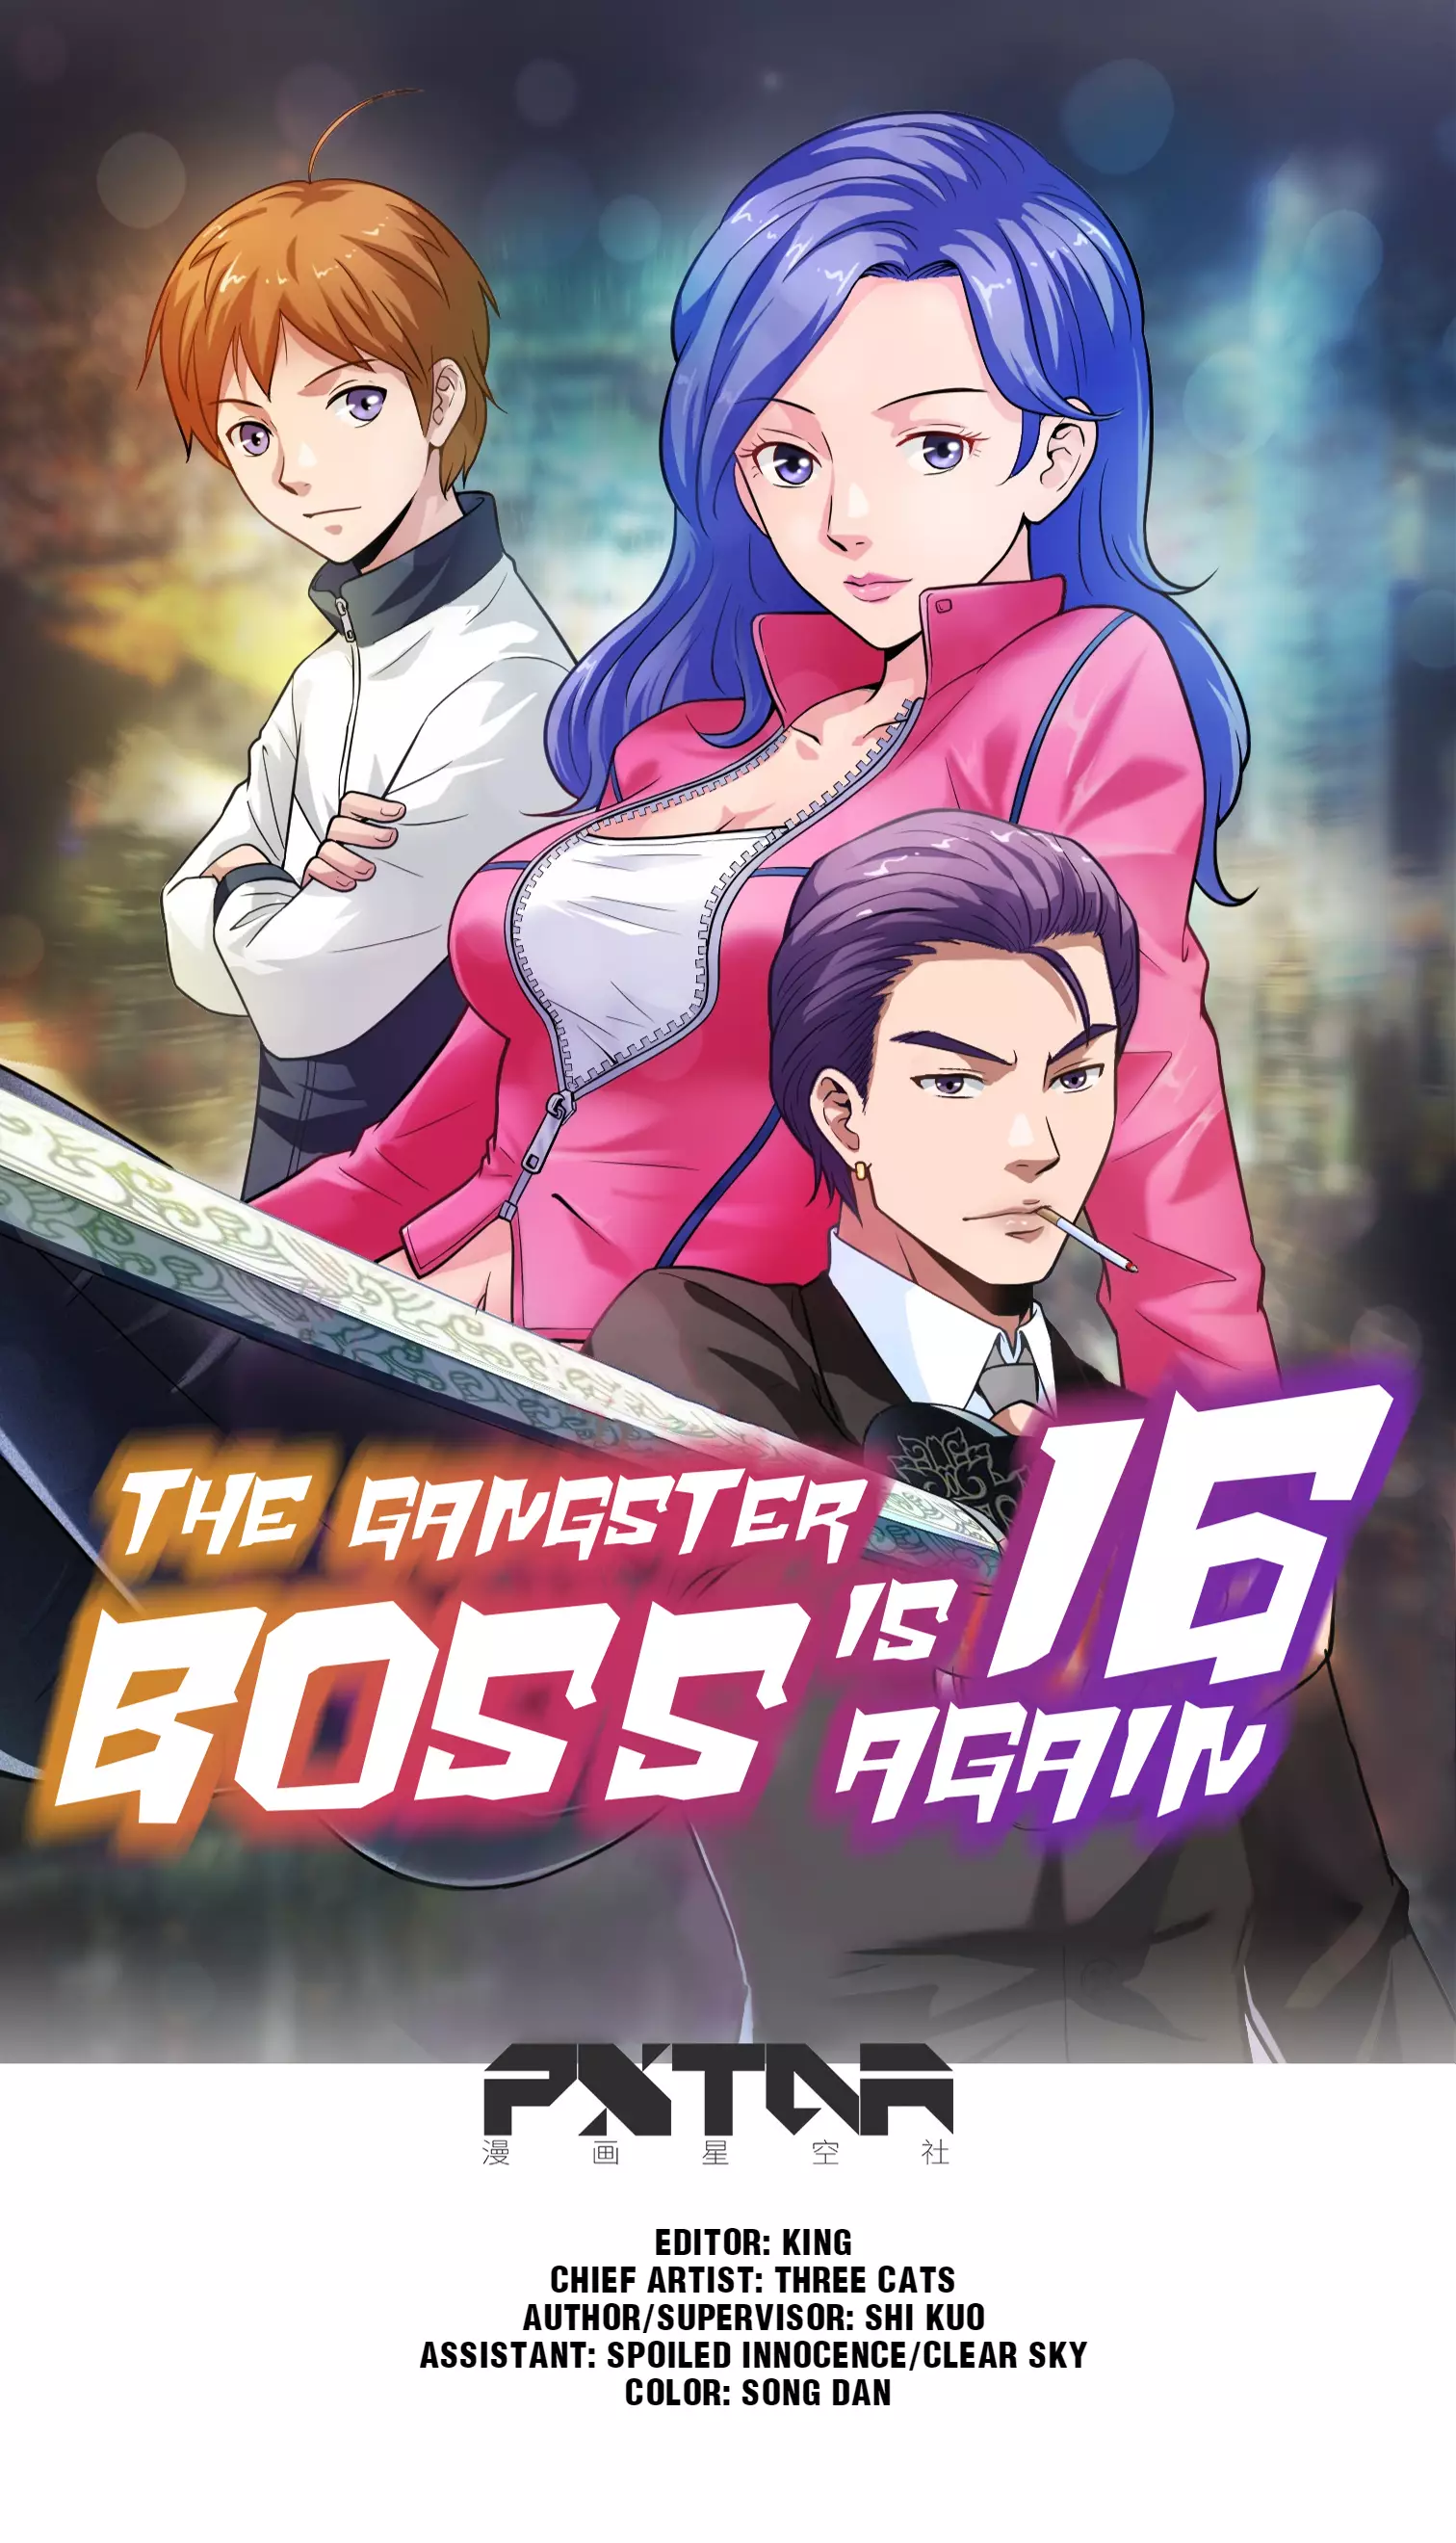 The Gangster Boss Is 16 Again - 8 page 1-298b1fb7